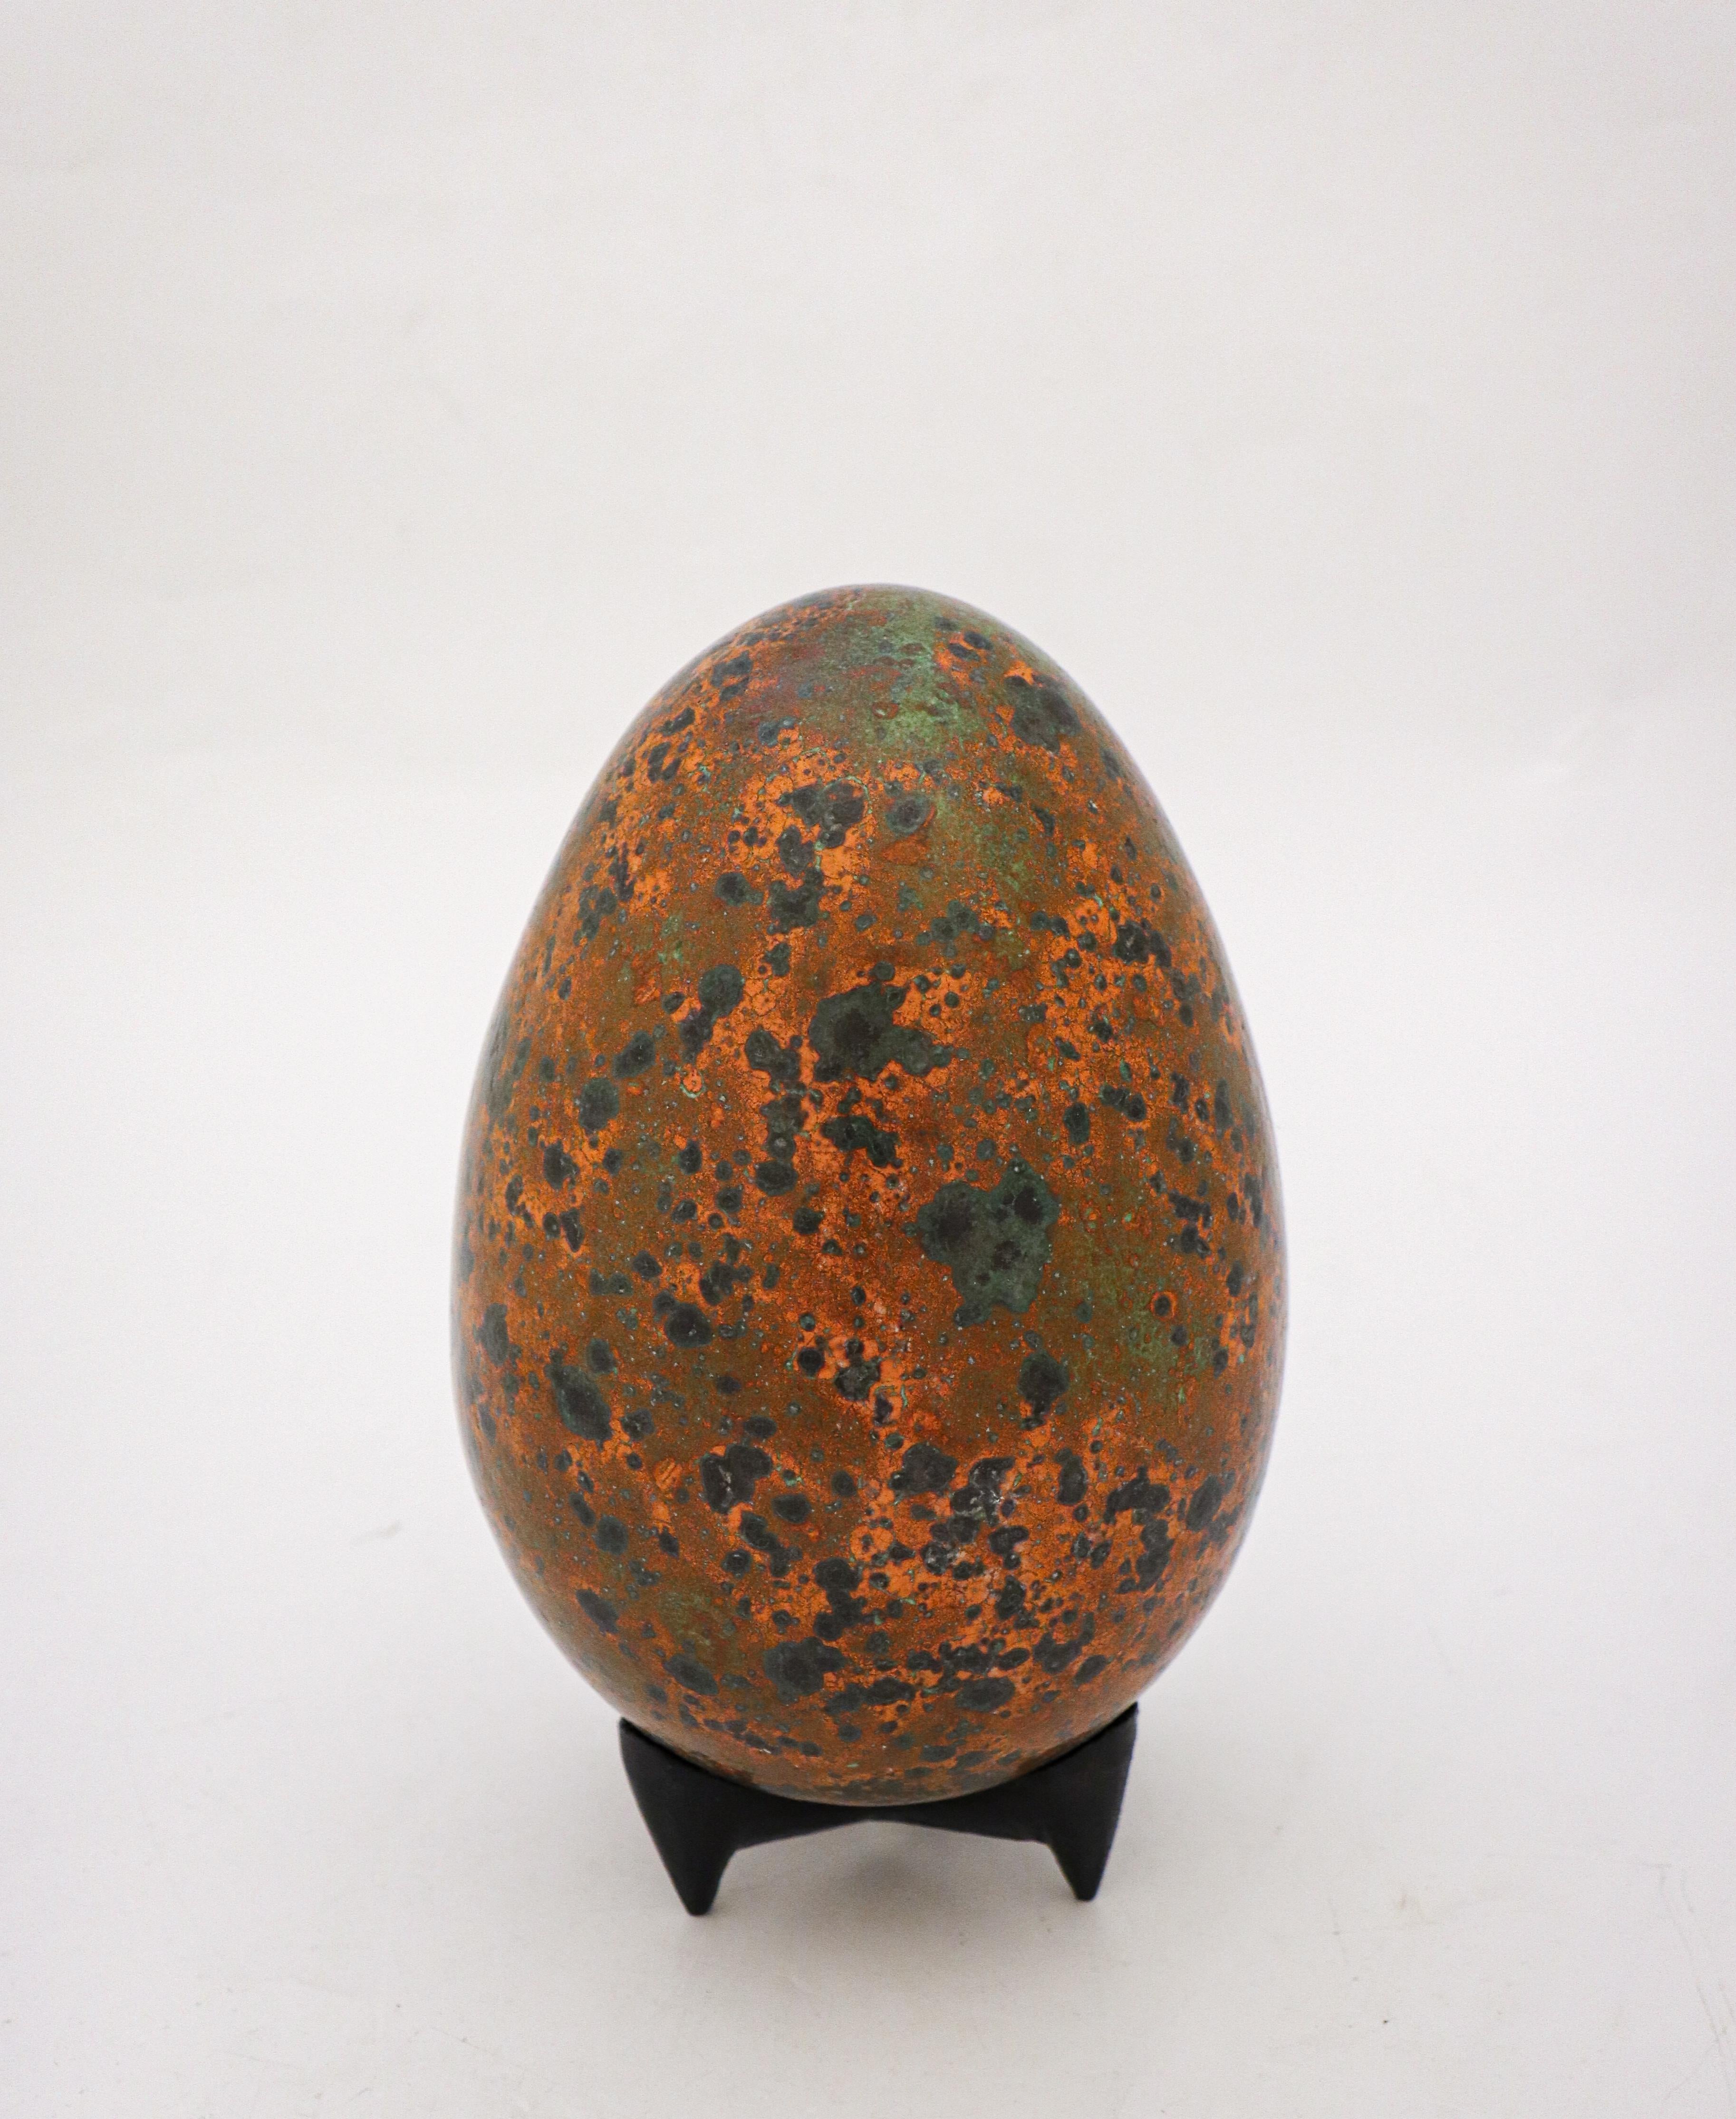 French Stoneware Egg Sculpture Orange/Brown/Green by Hans Hedberg, Biot, France For Sale